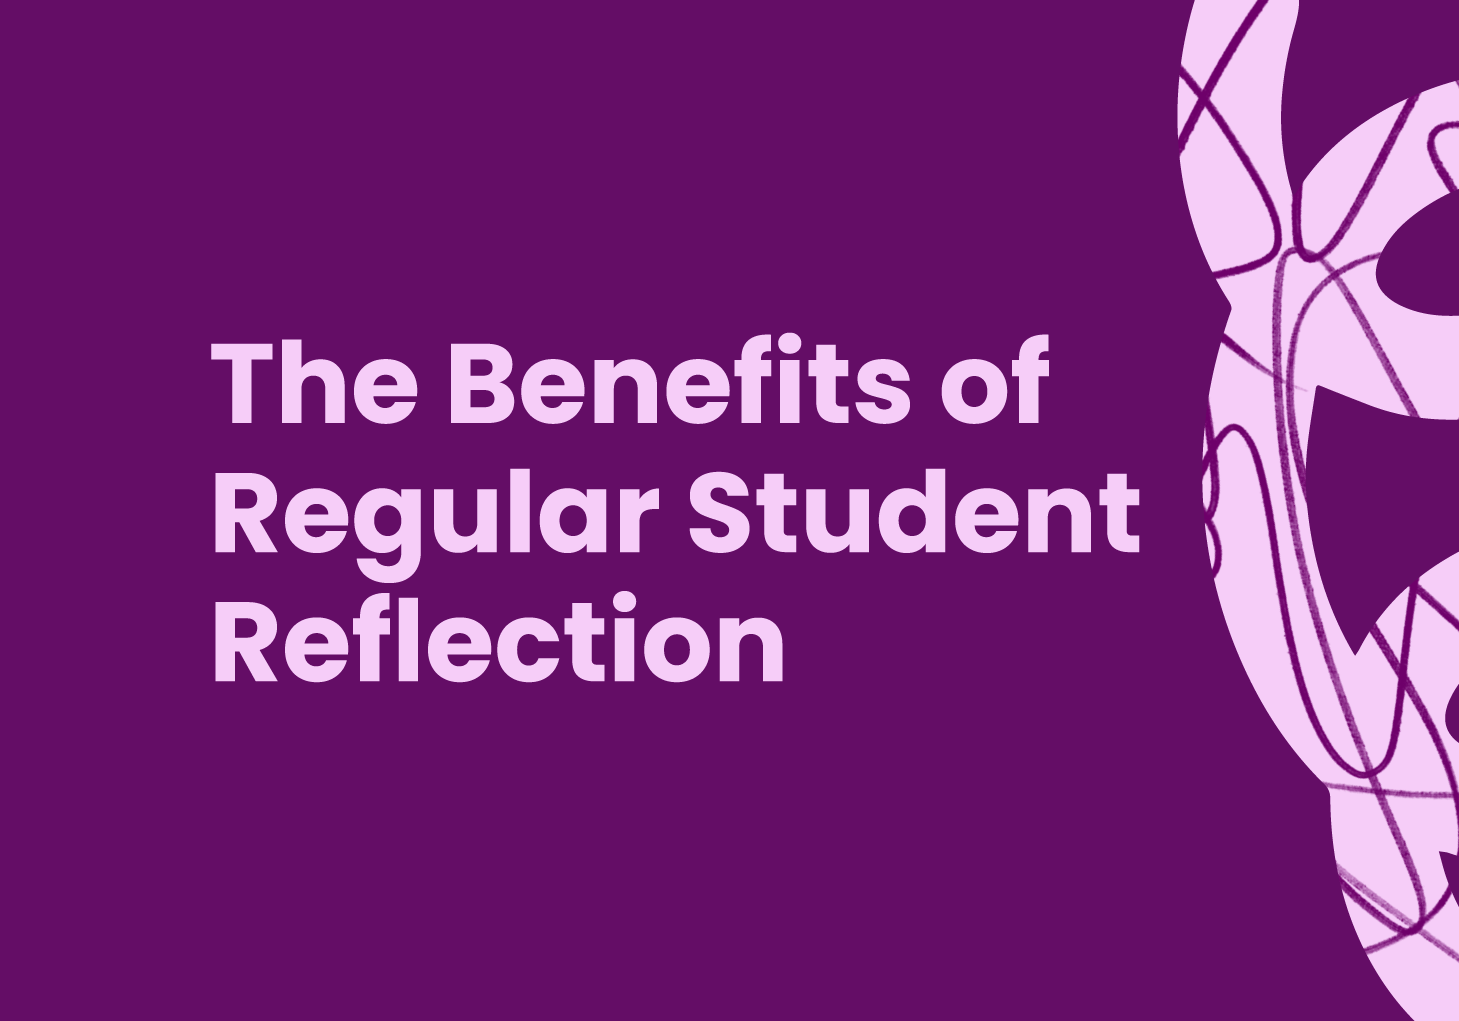 The Benefits of Regular Student Reflection